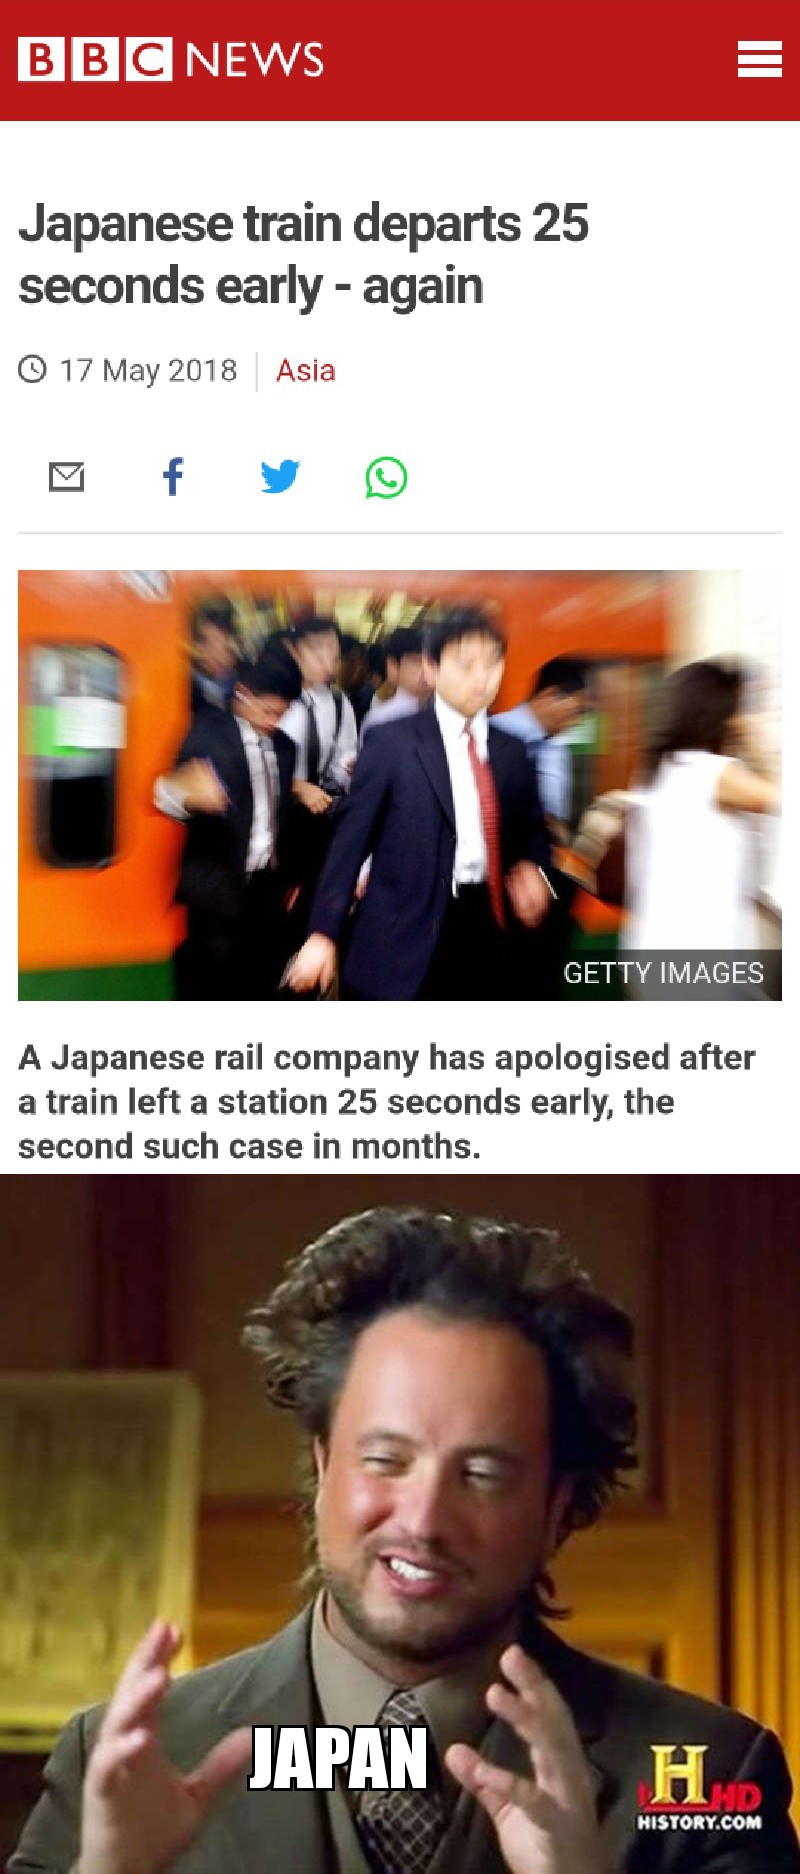 mind blown history channel - Bbc News Japanese train departs 25 seconds early again Asia Getty Images A Japanese rail company has apologised after a train left a station 25 seconds early, the second such case in months. Japan Hd History.Com